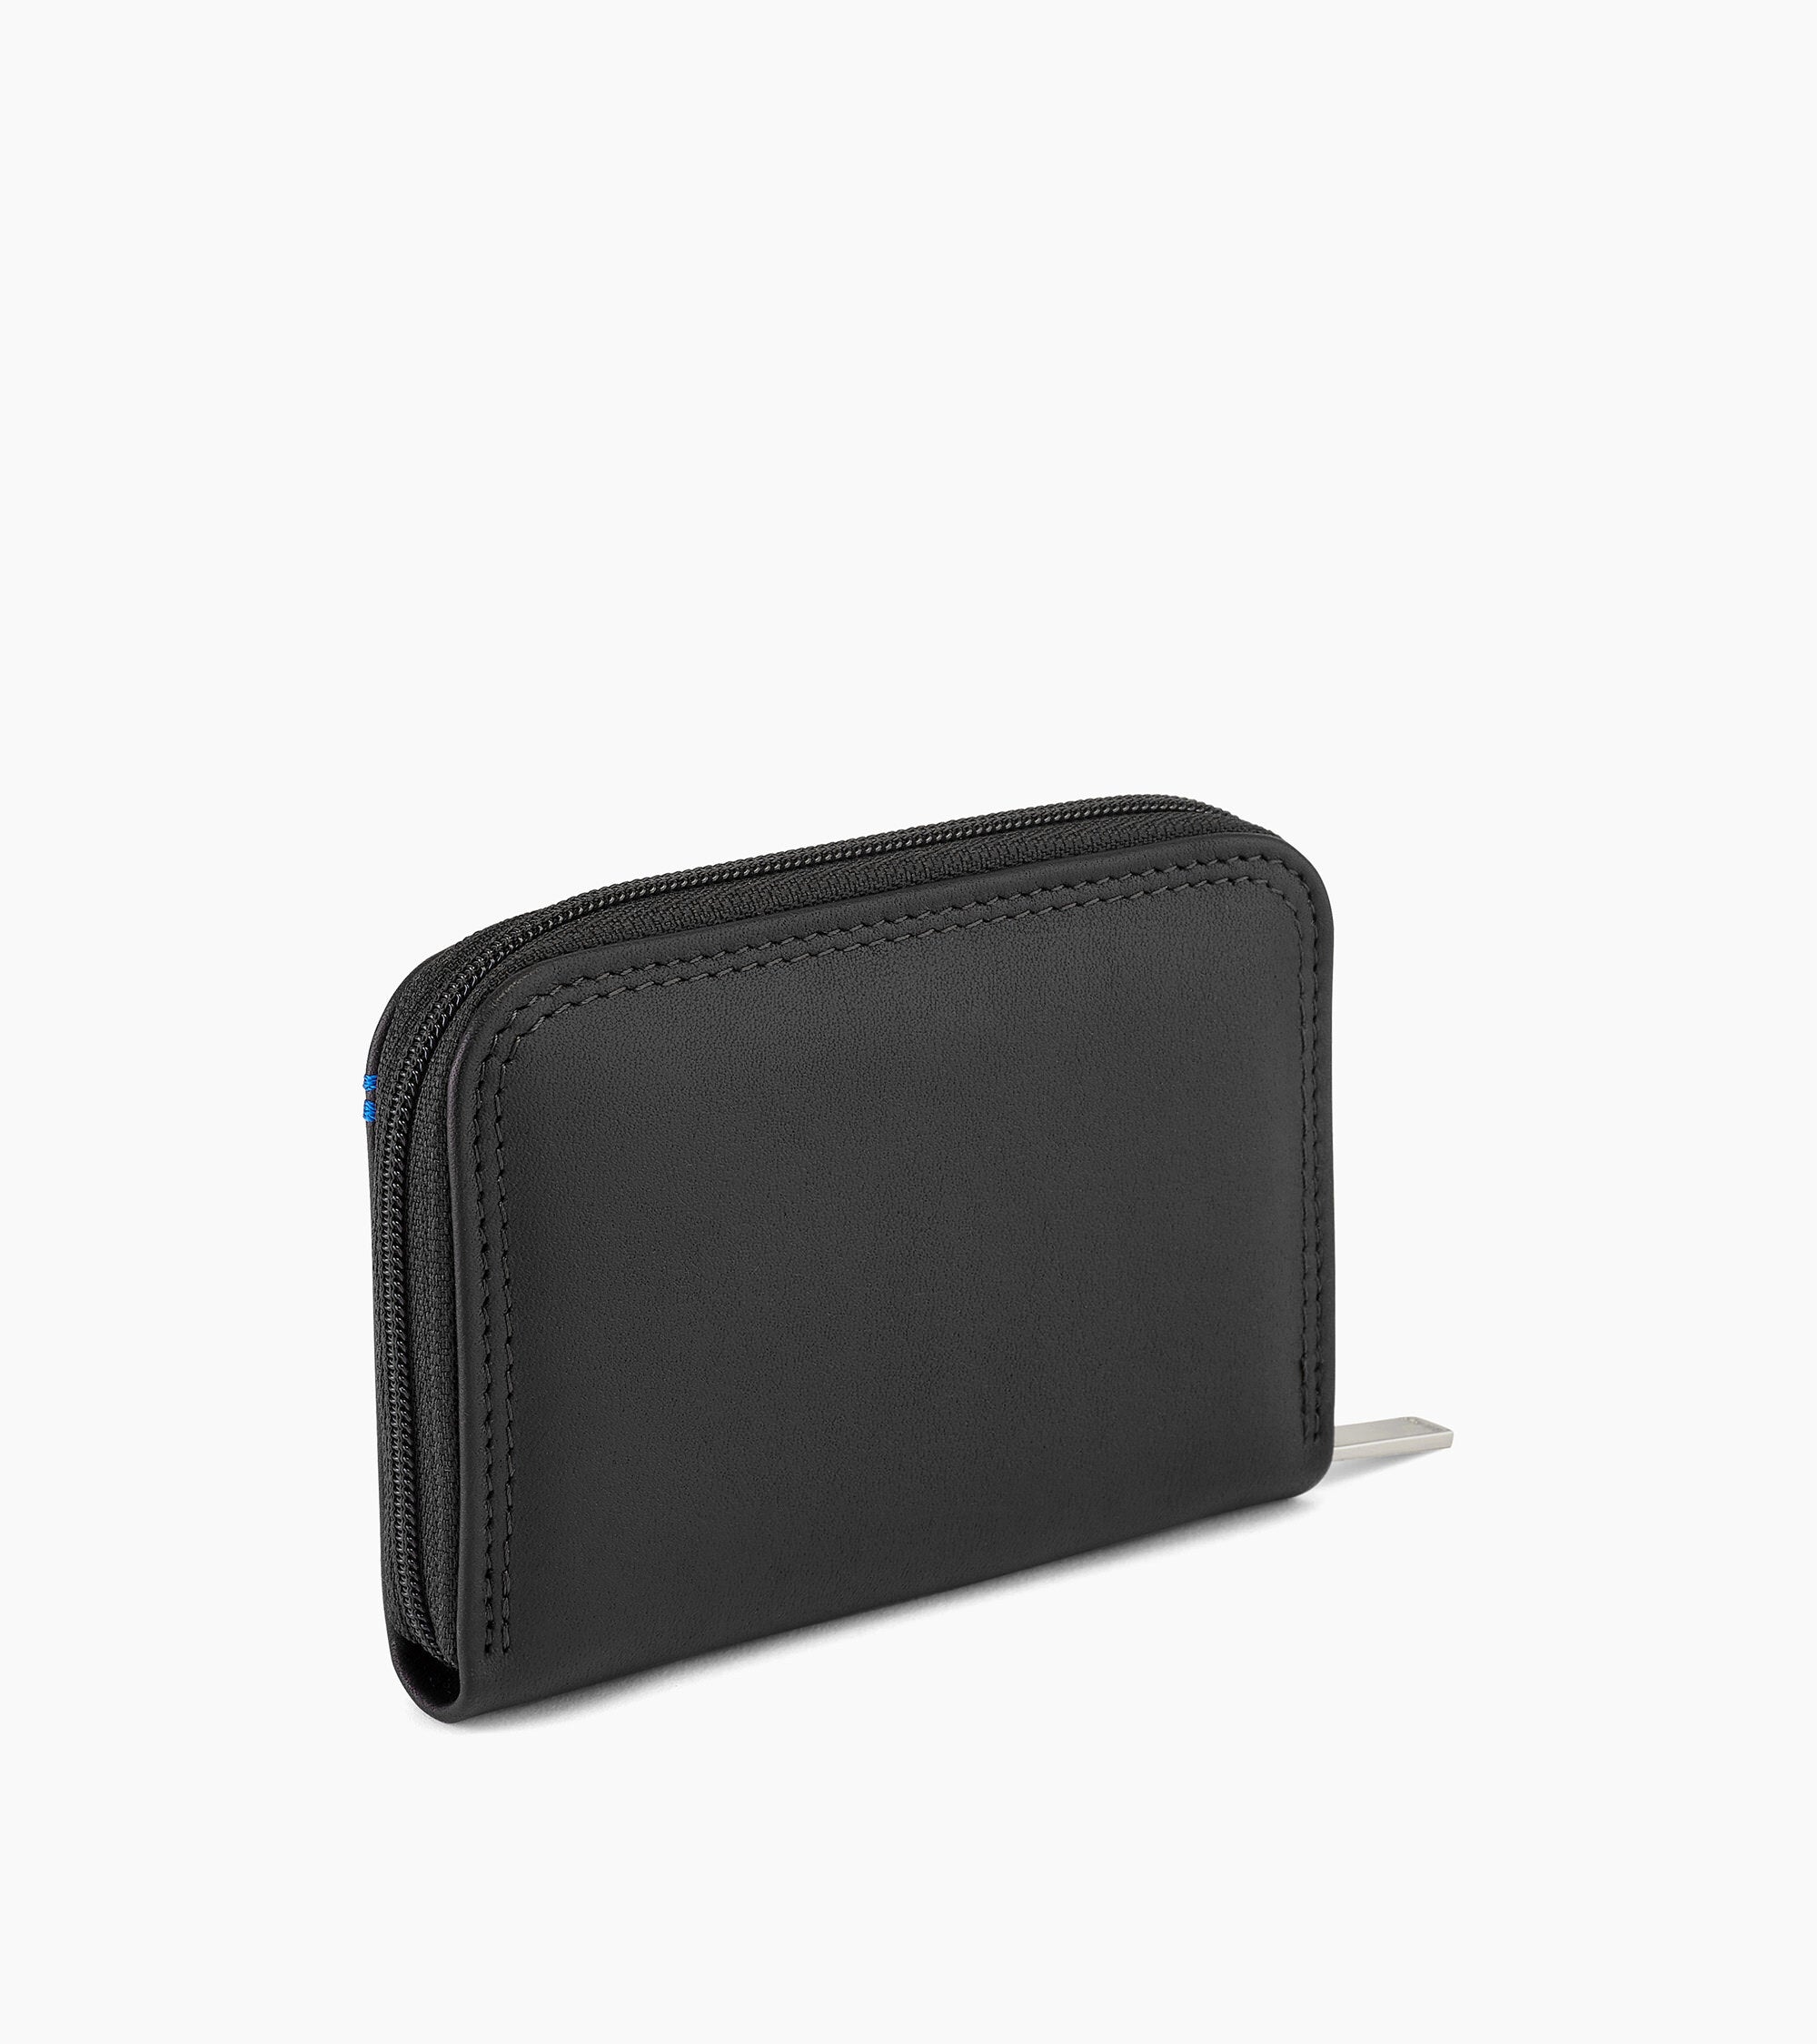 Zipped Martin smooth leather coin wallet